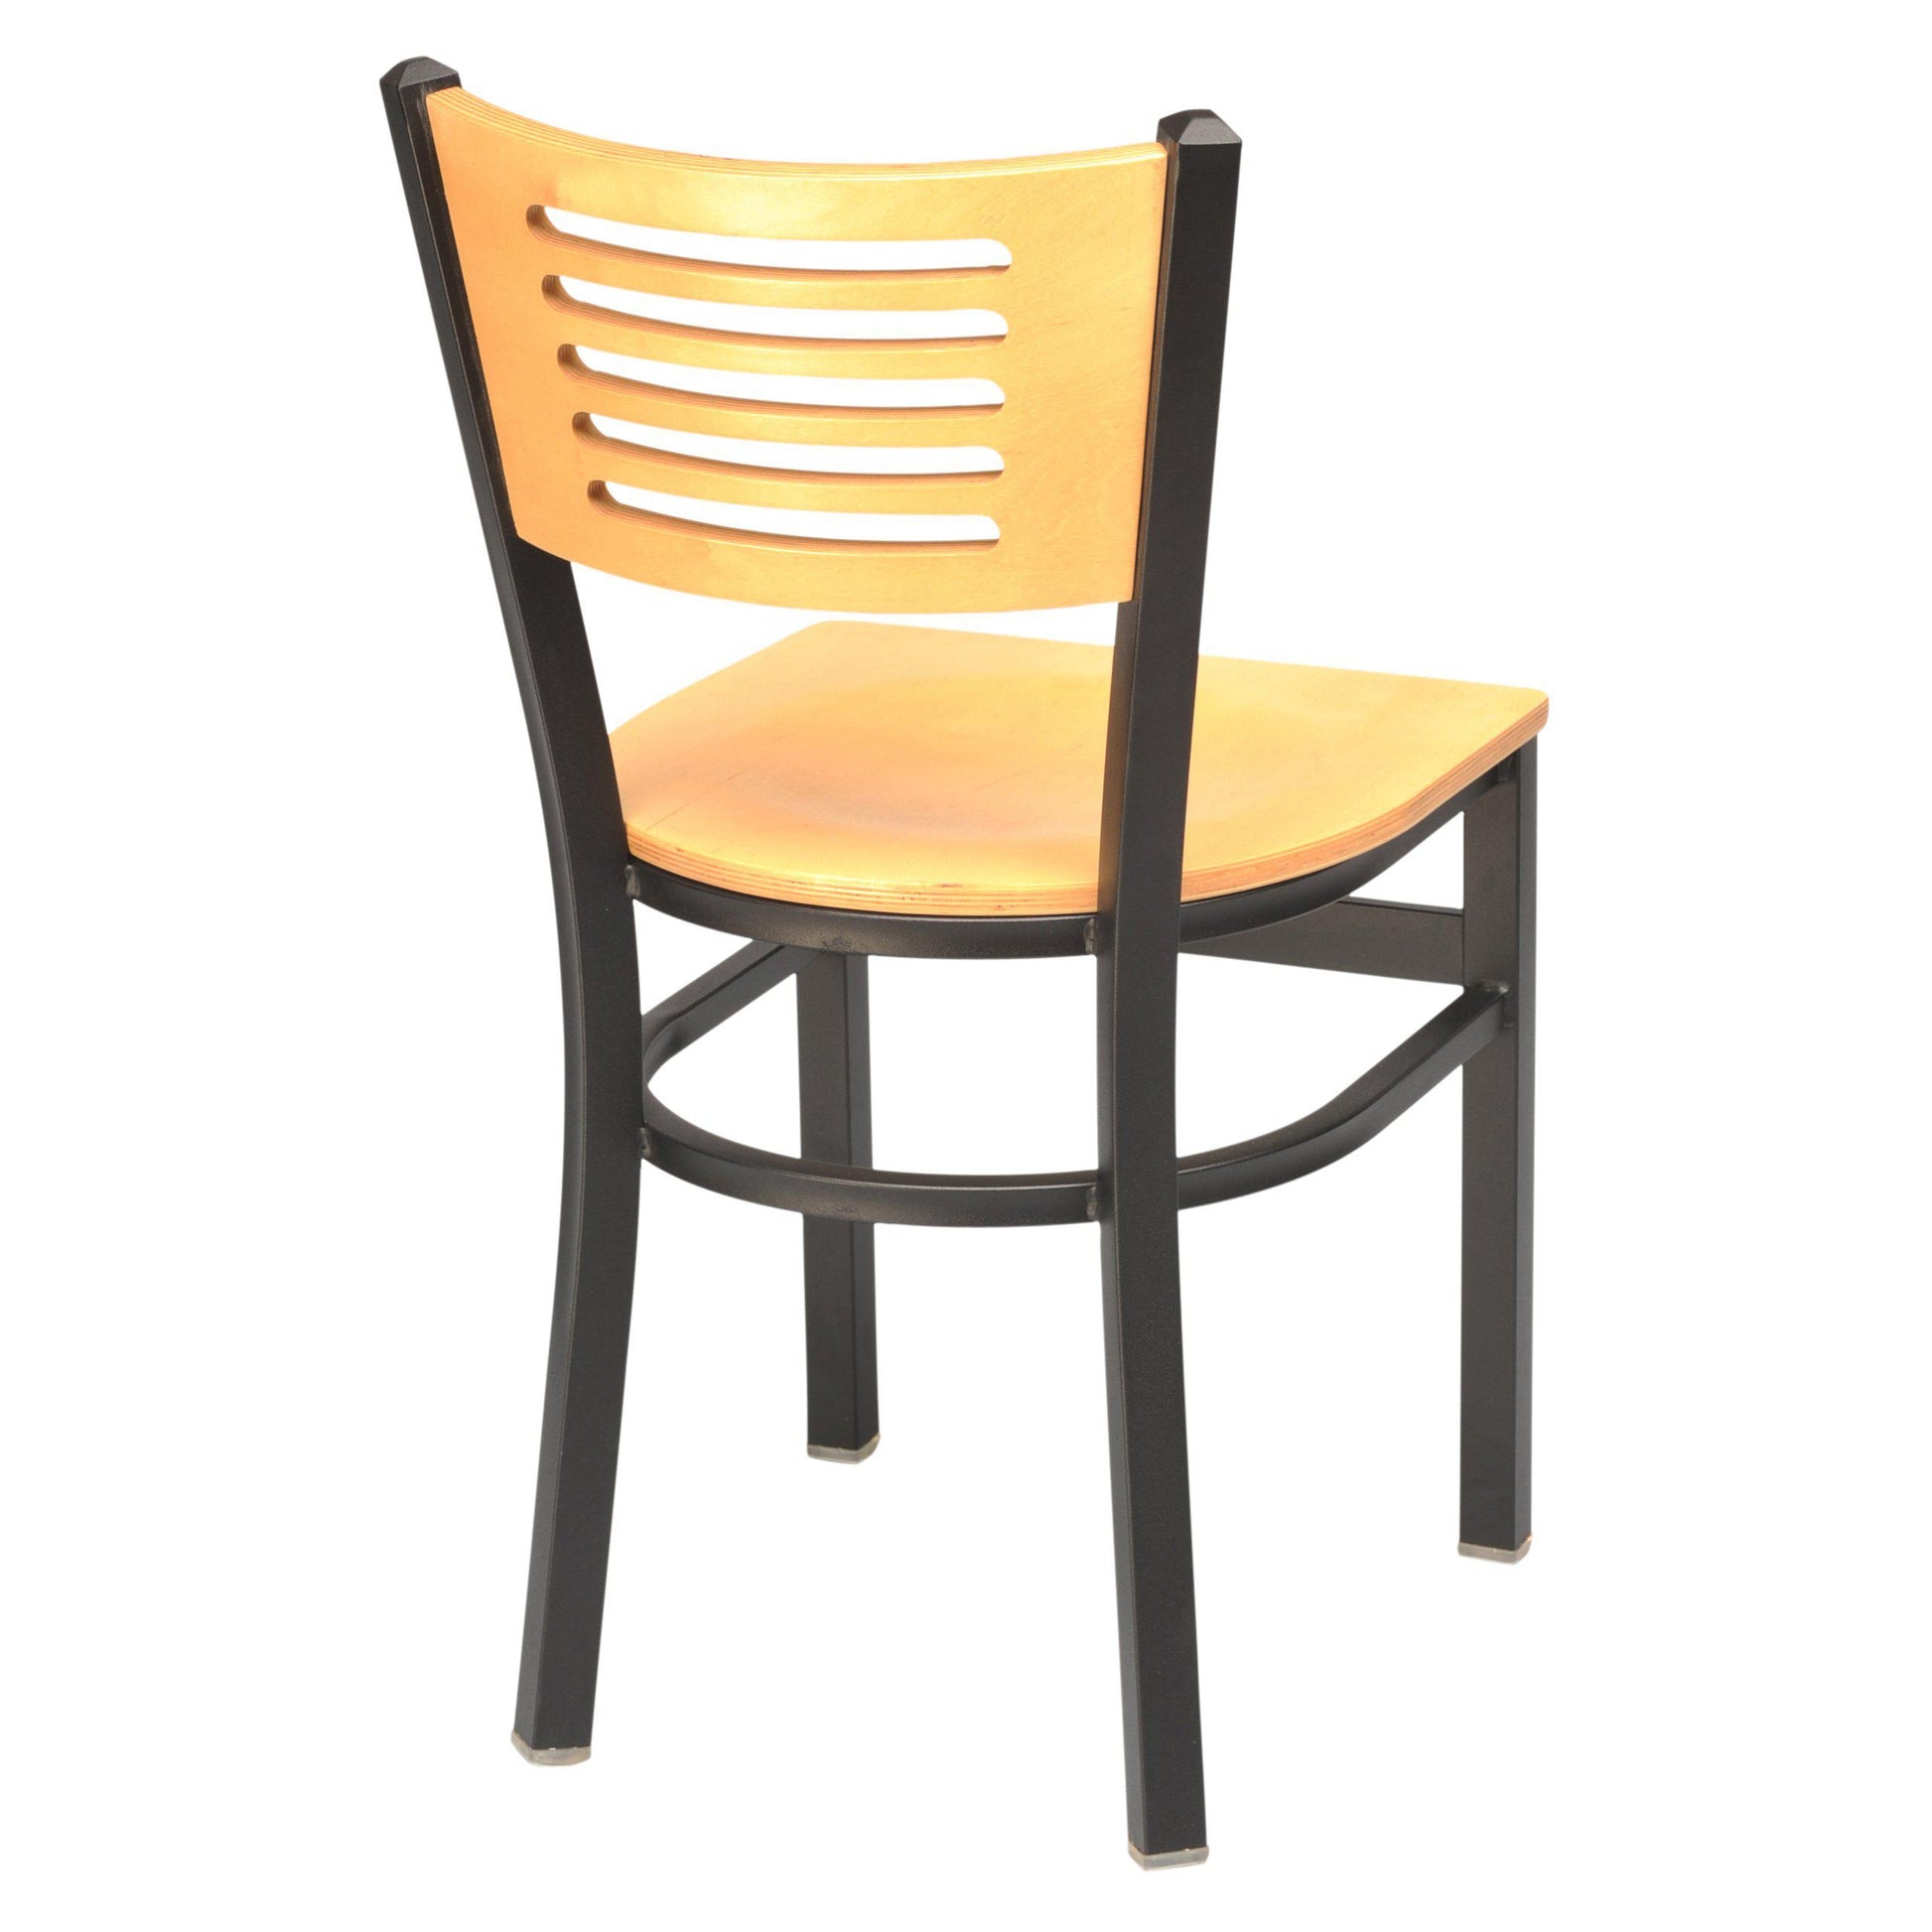 Metal Chair with Slots in Wood Back-Richardson Seating